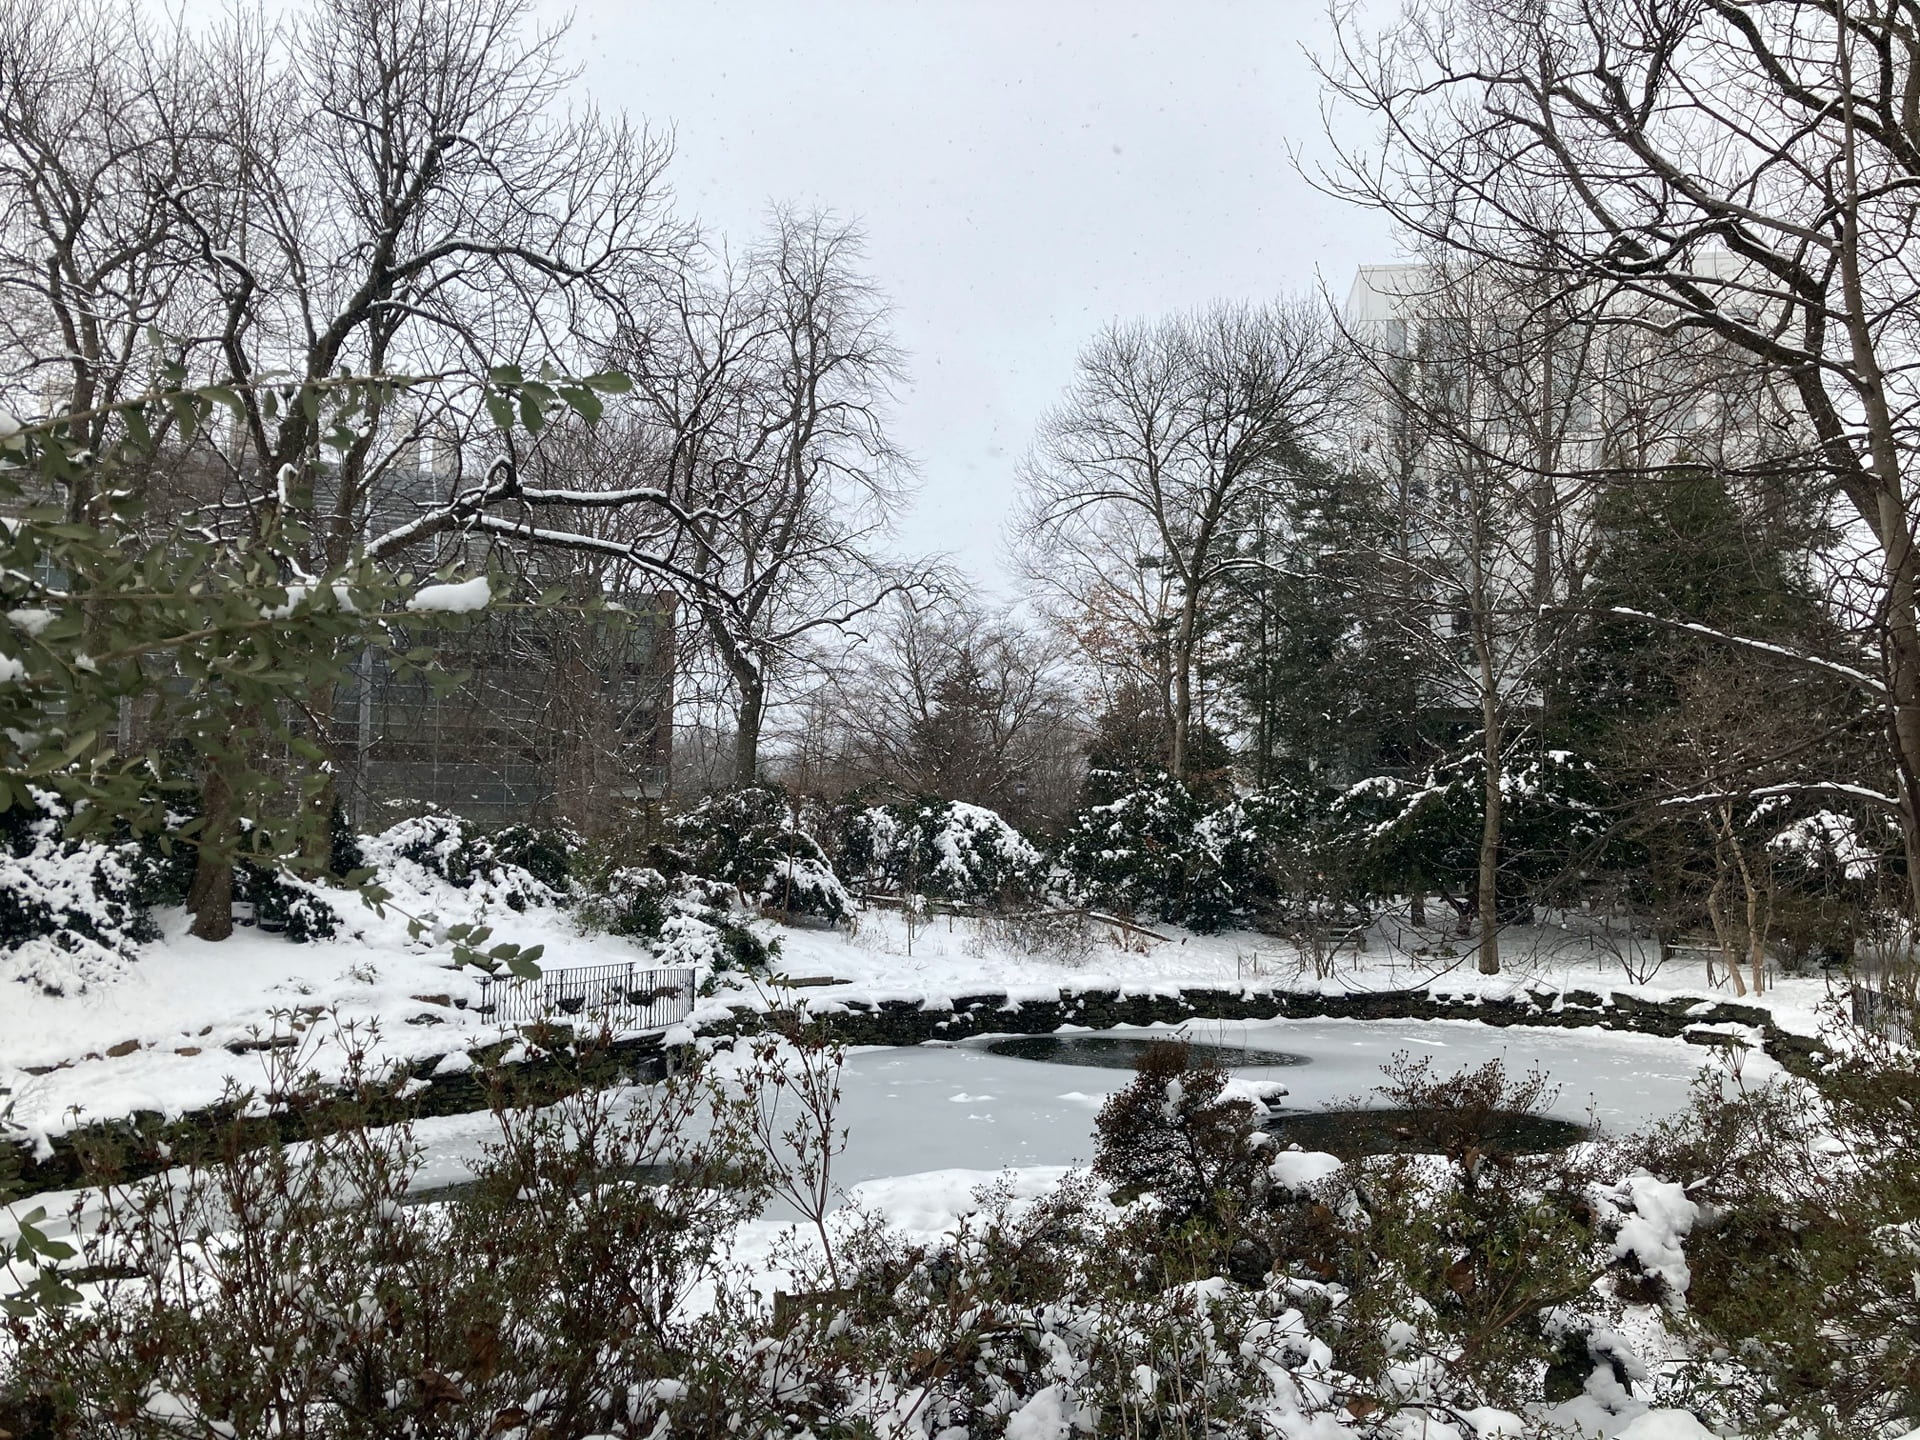 An icy BioPond, viewed from the Woodland Garden.